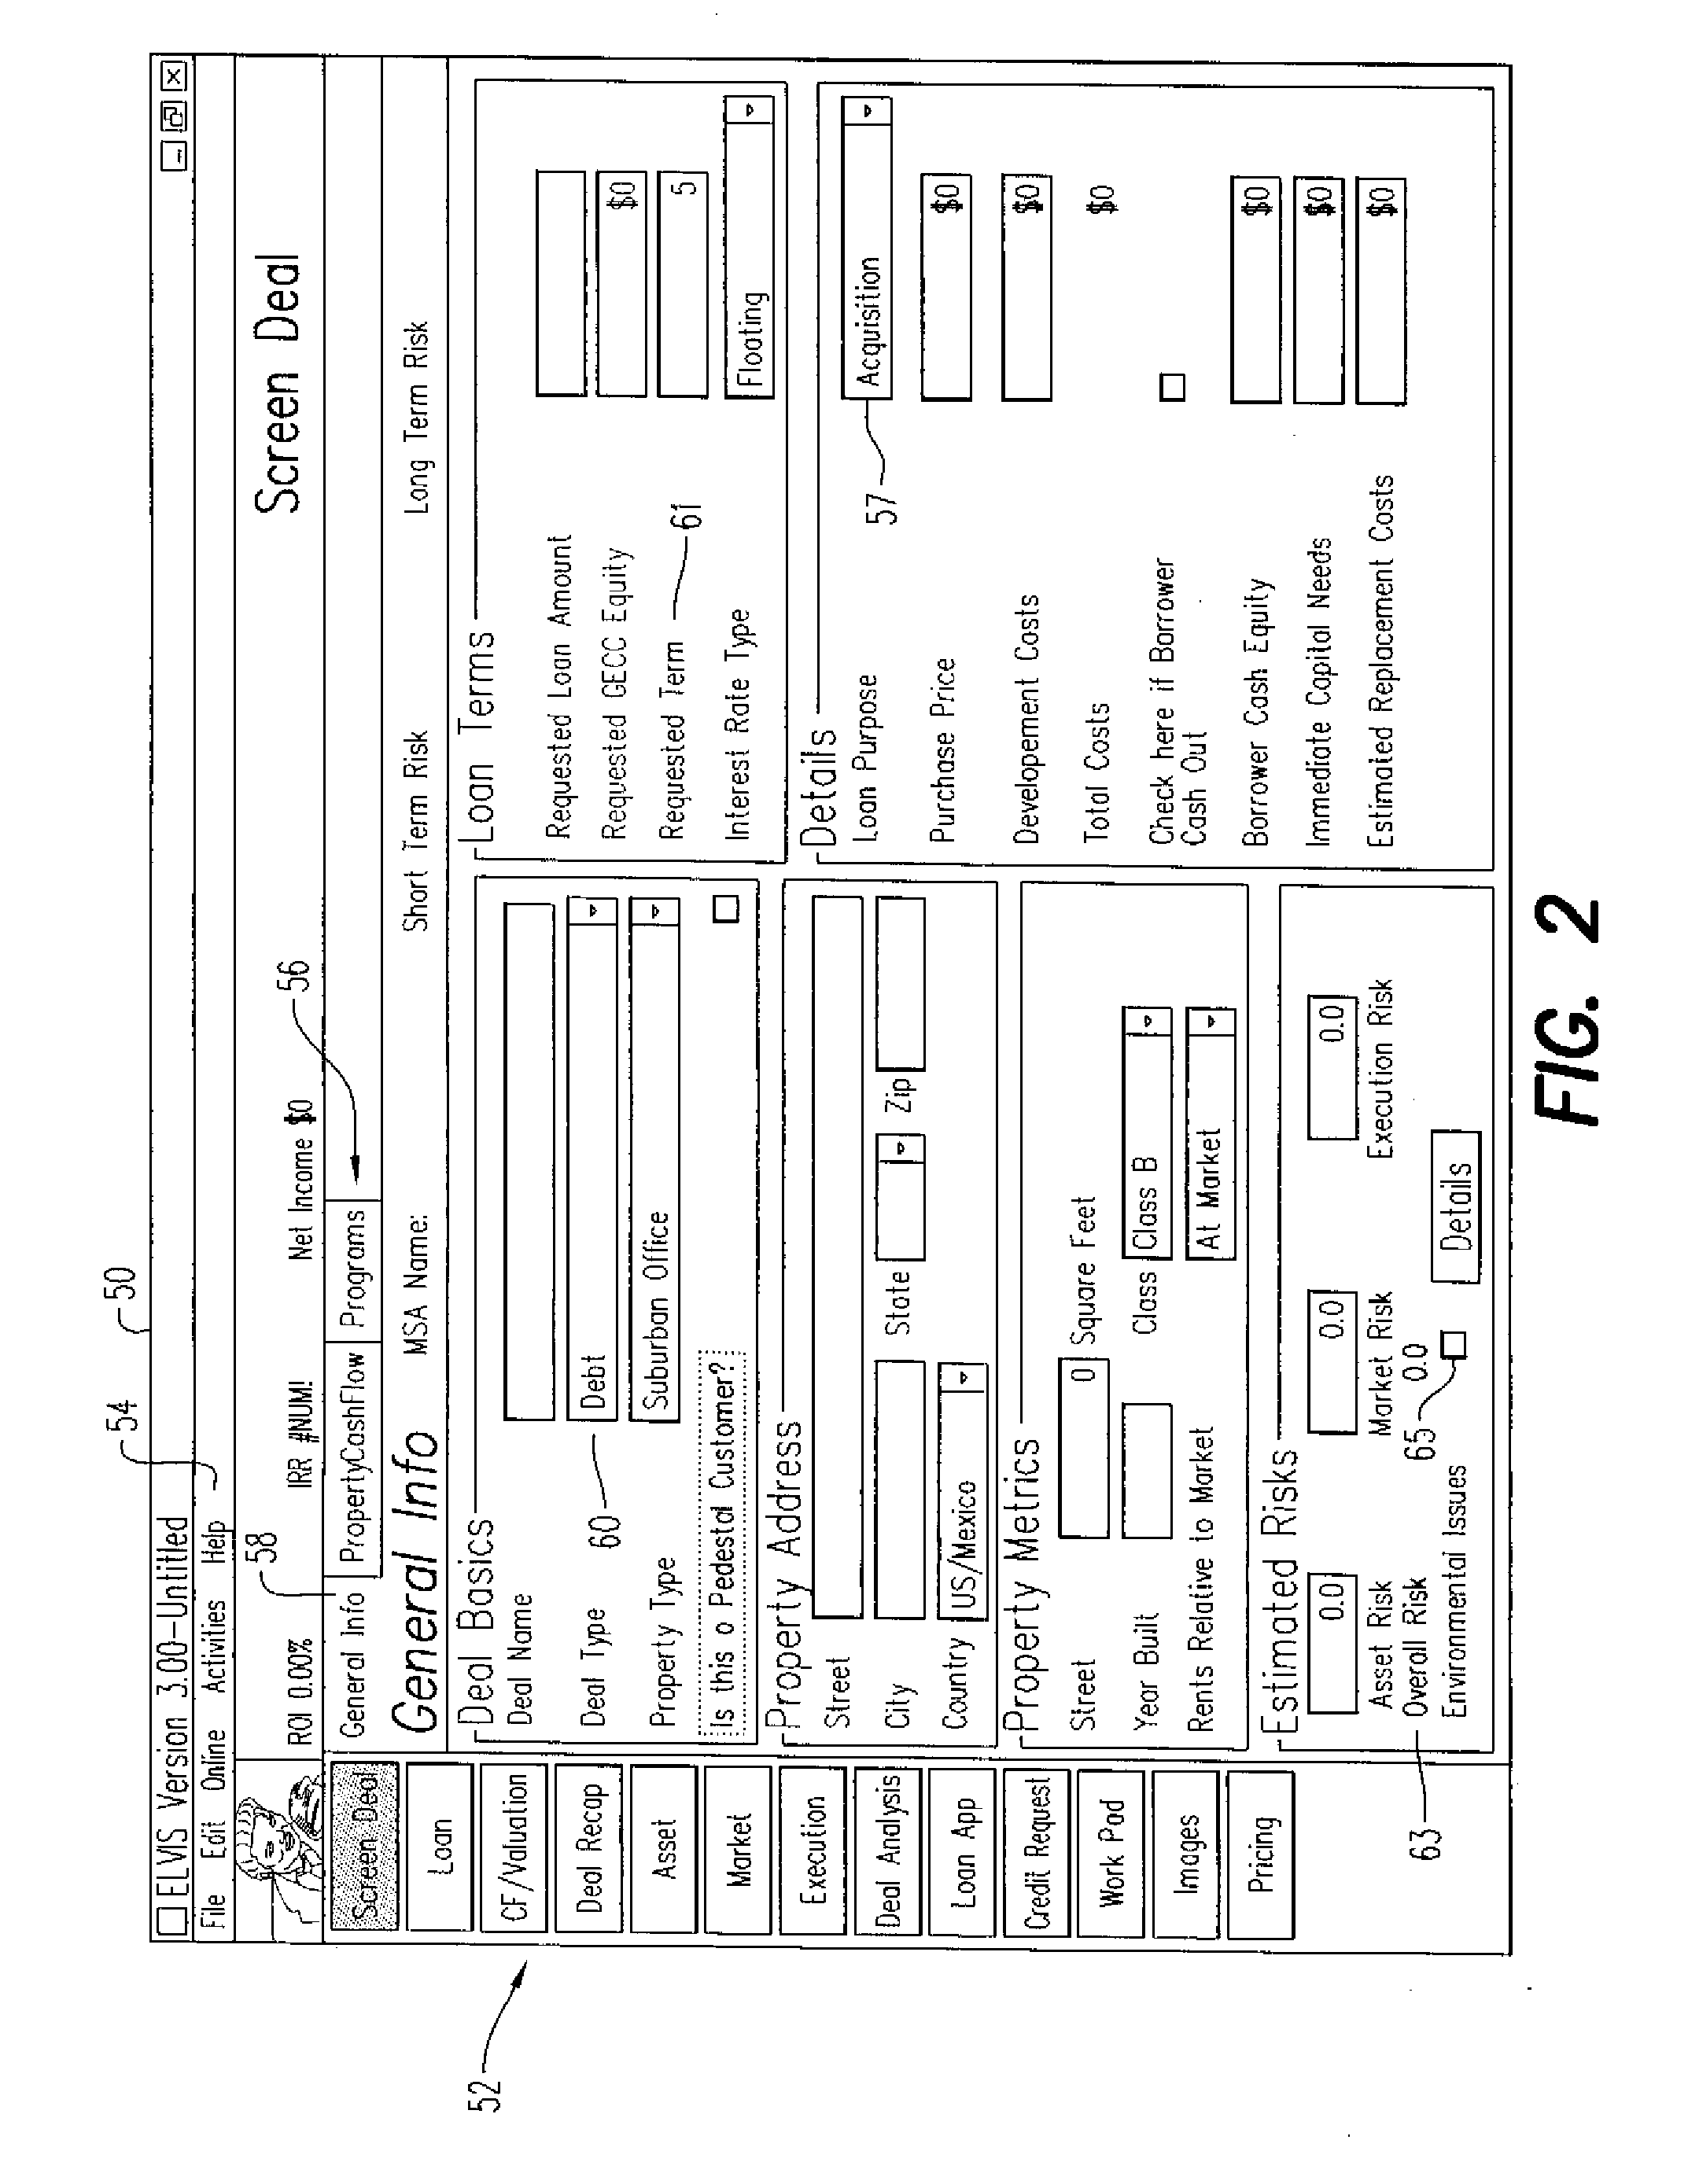 Method and system for loan organization and underwriting